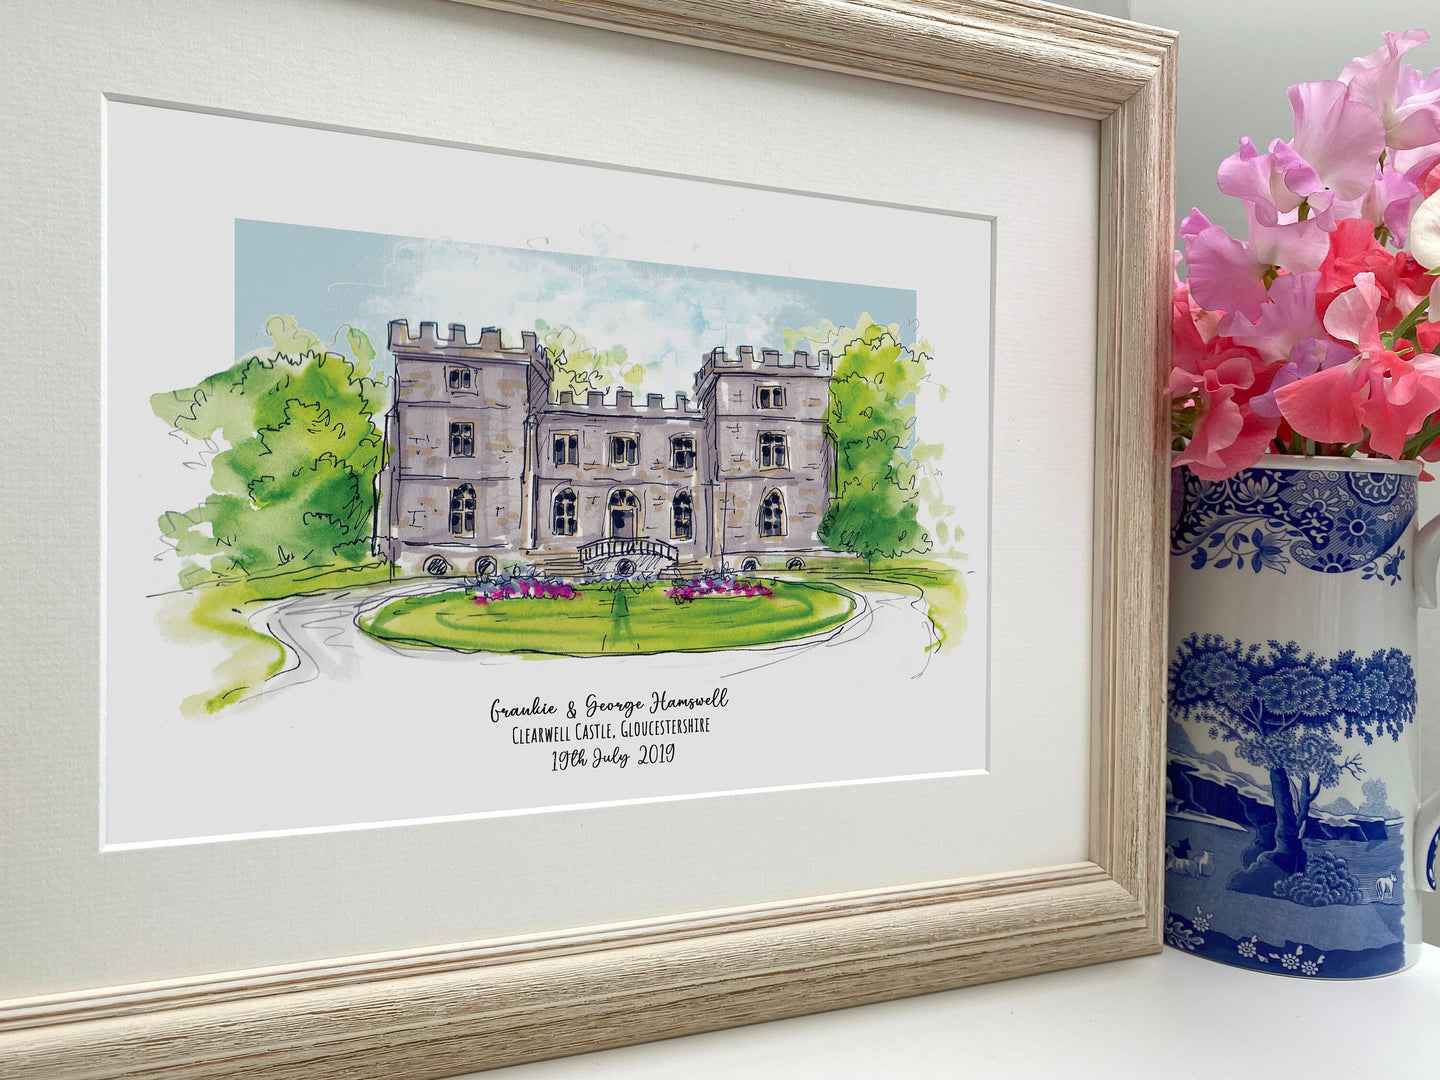 Personalised Clearwell Castle Art Giclee Print - Clearwell Castle Wedding Venue - Wedding Illustration - Clearwell Castle Gloucester Wedding